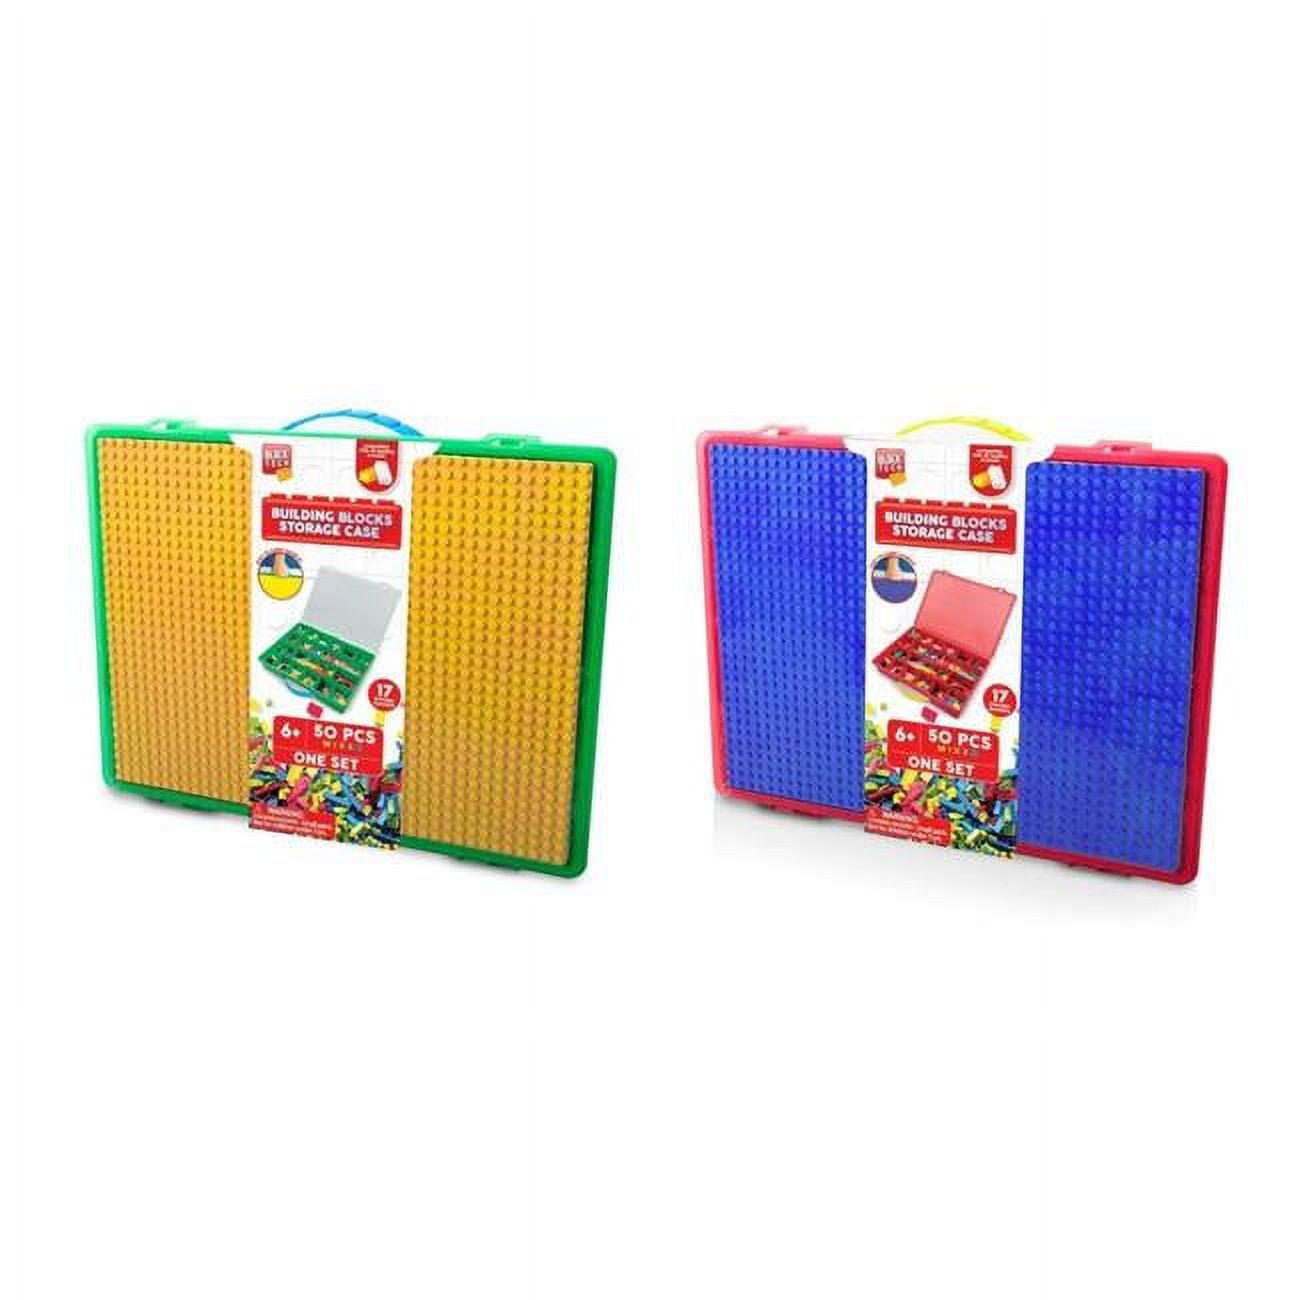 Picture of DDI 2353630 50 Piece Building Blocks Storage Case - Assorted Colors Case of 4